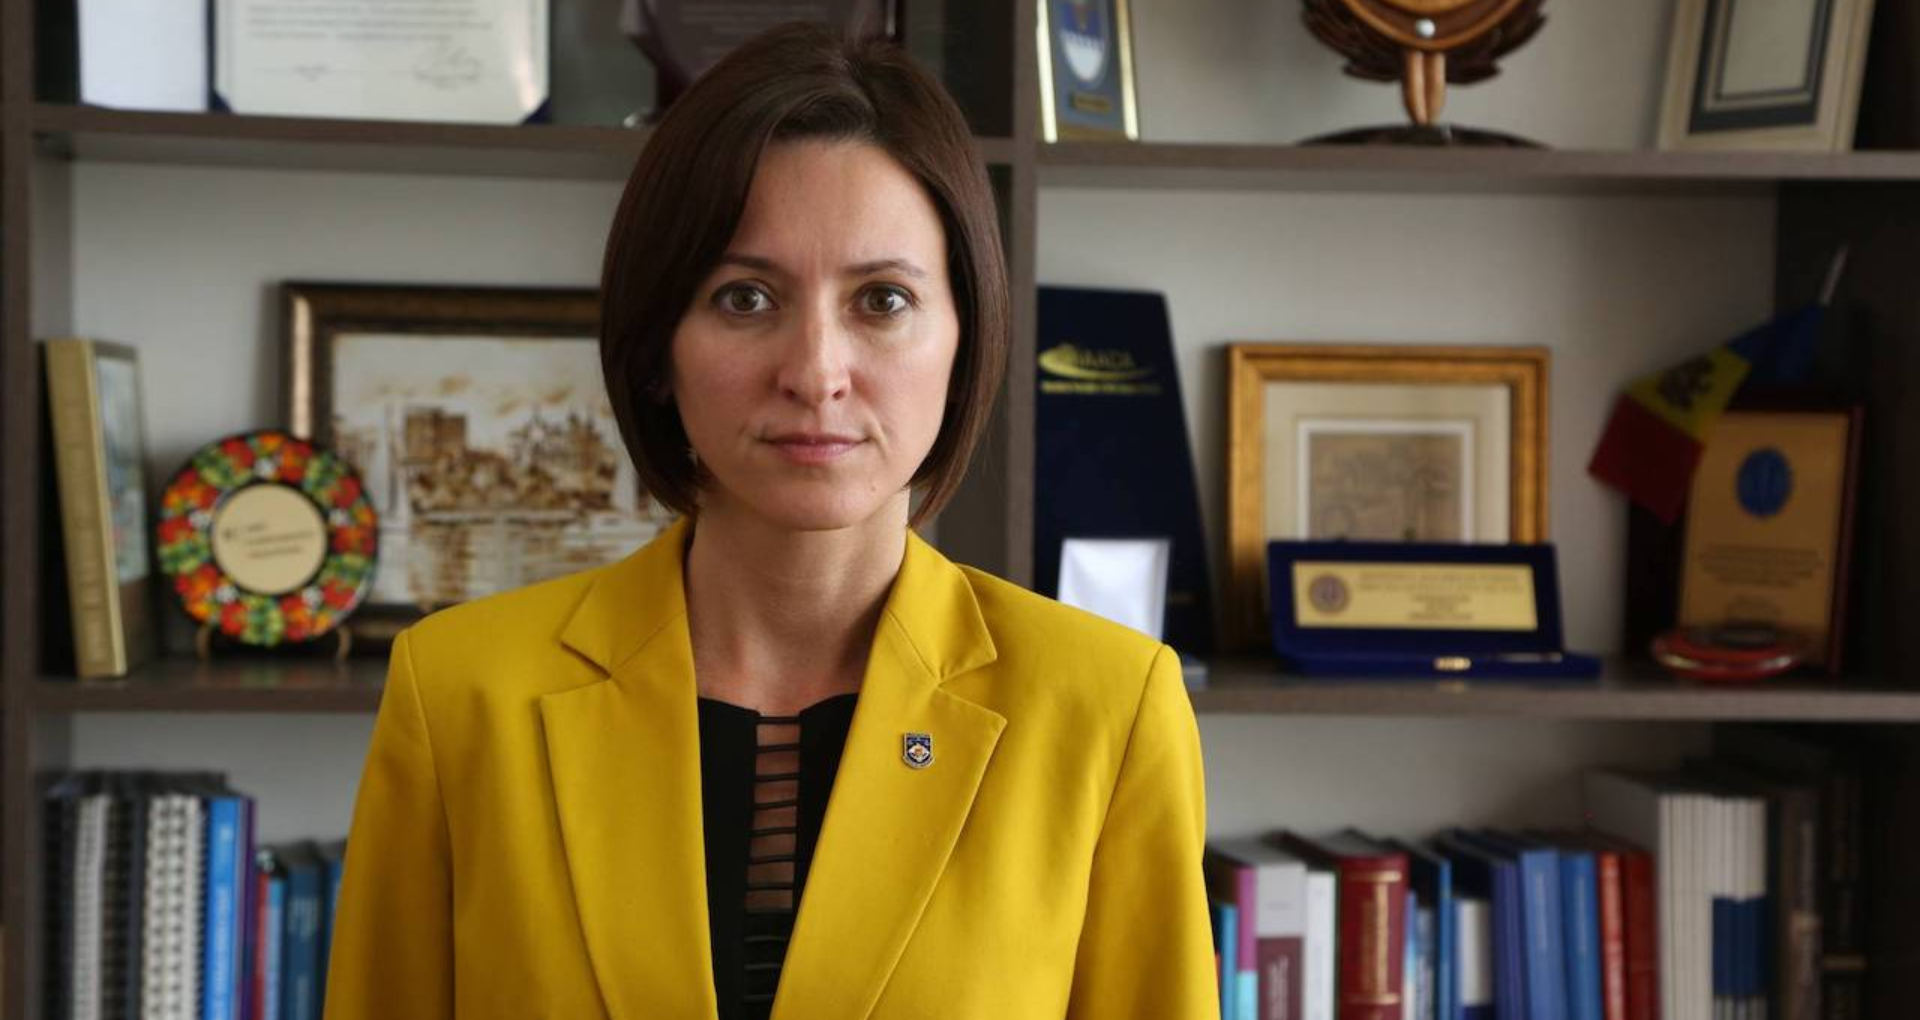 The third judge and candidate for the position of member of the Superior Council of Magistracy who withdraws from the competition – Iana Talmaci